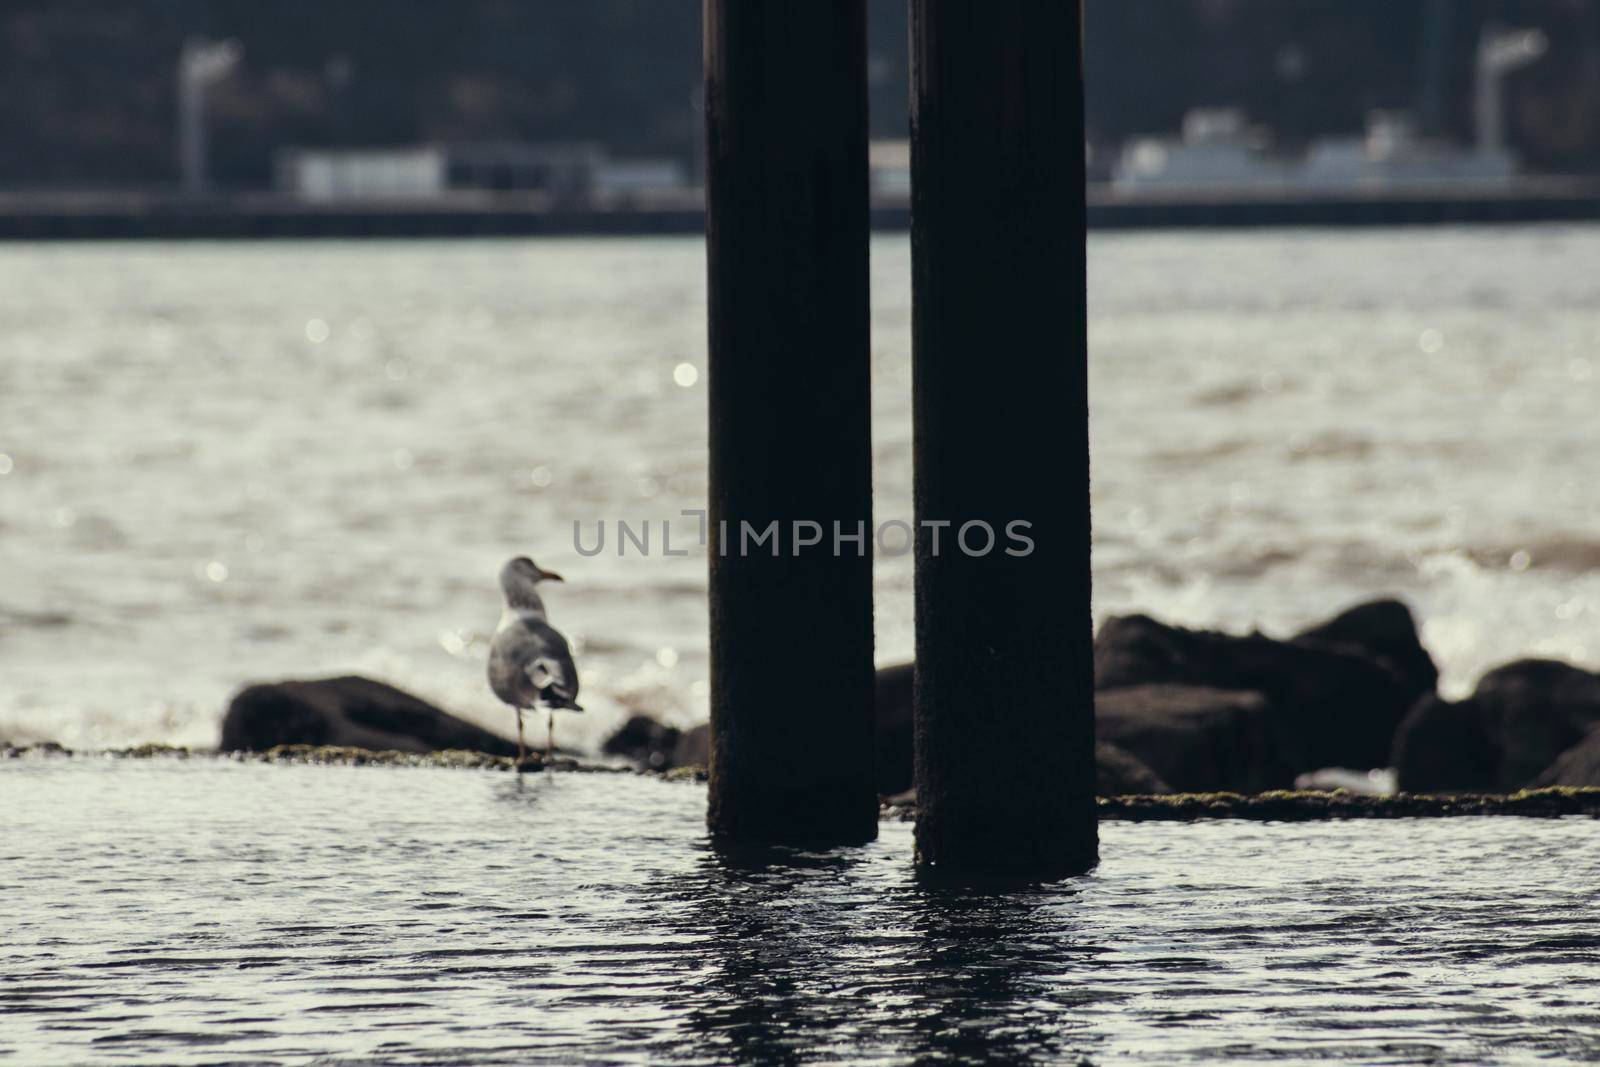 A bird next to two pillars in the water in Lisbon